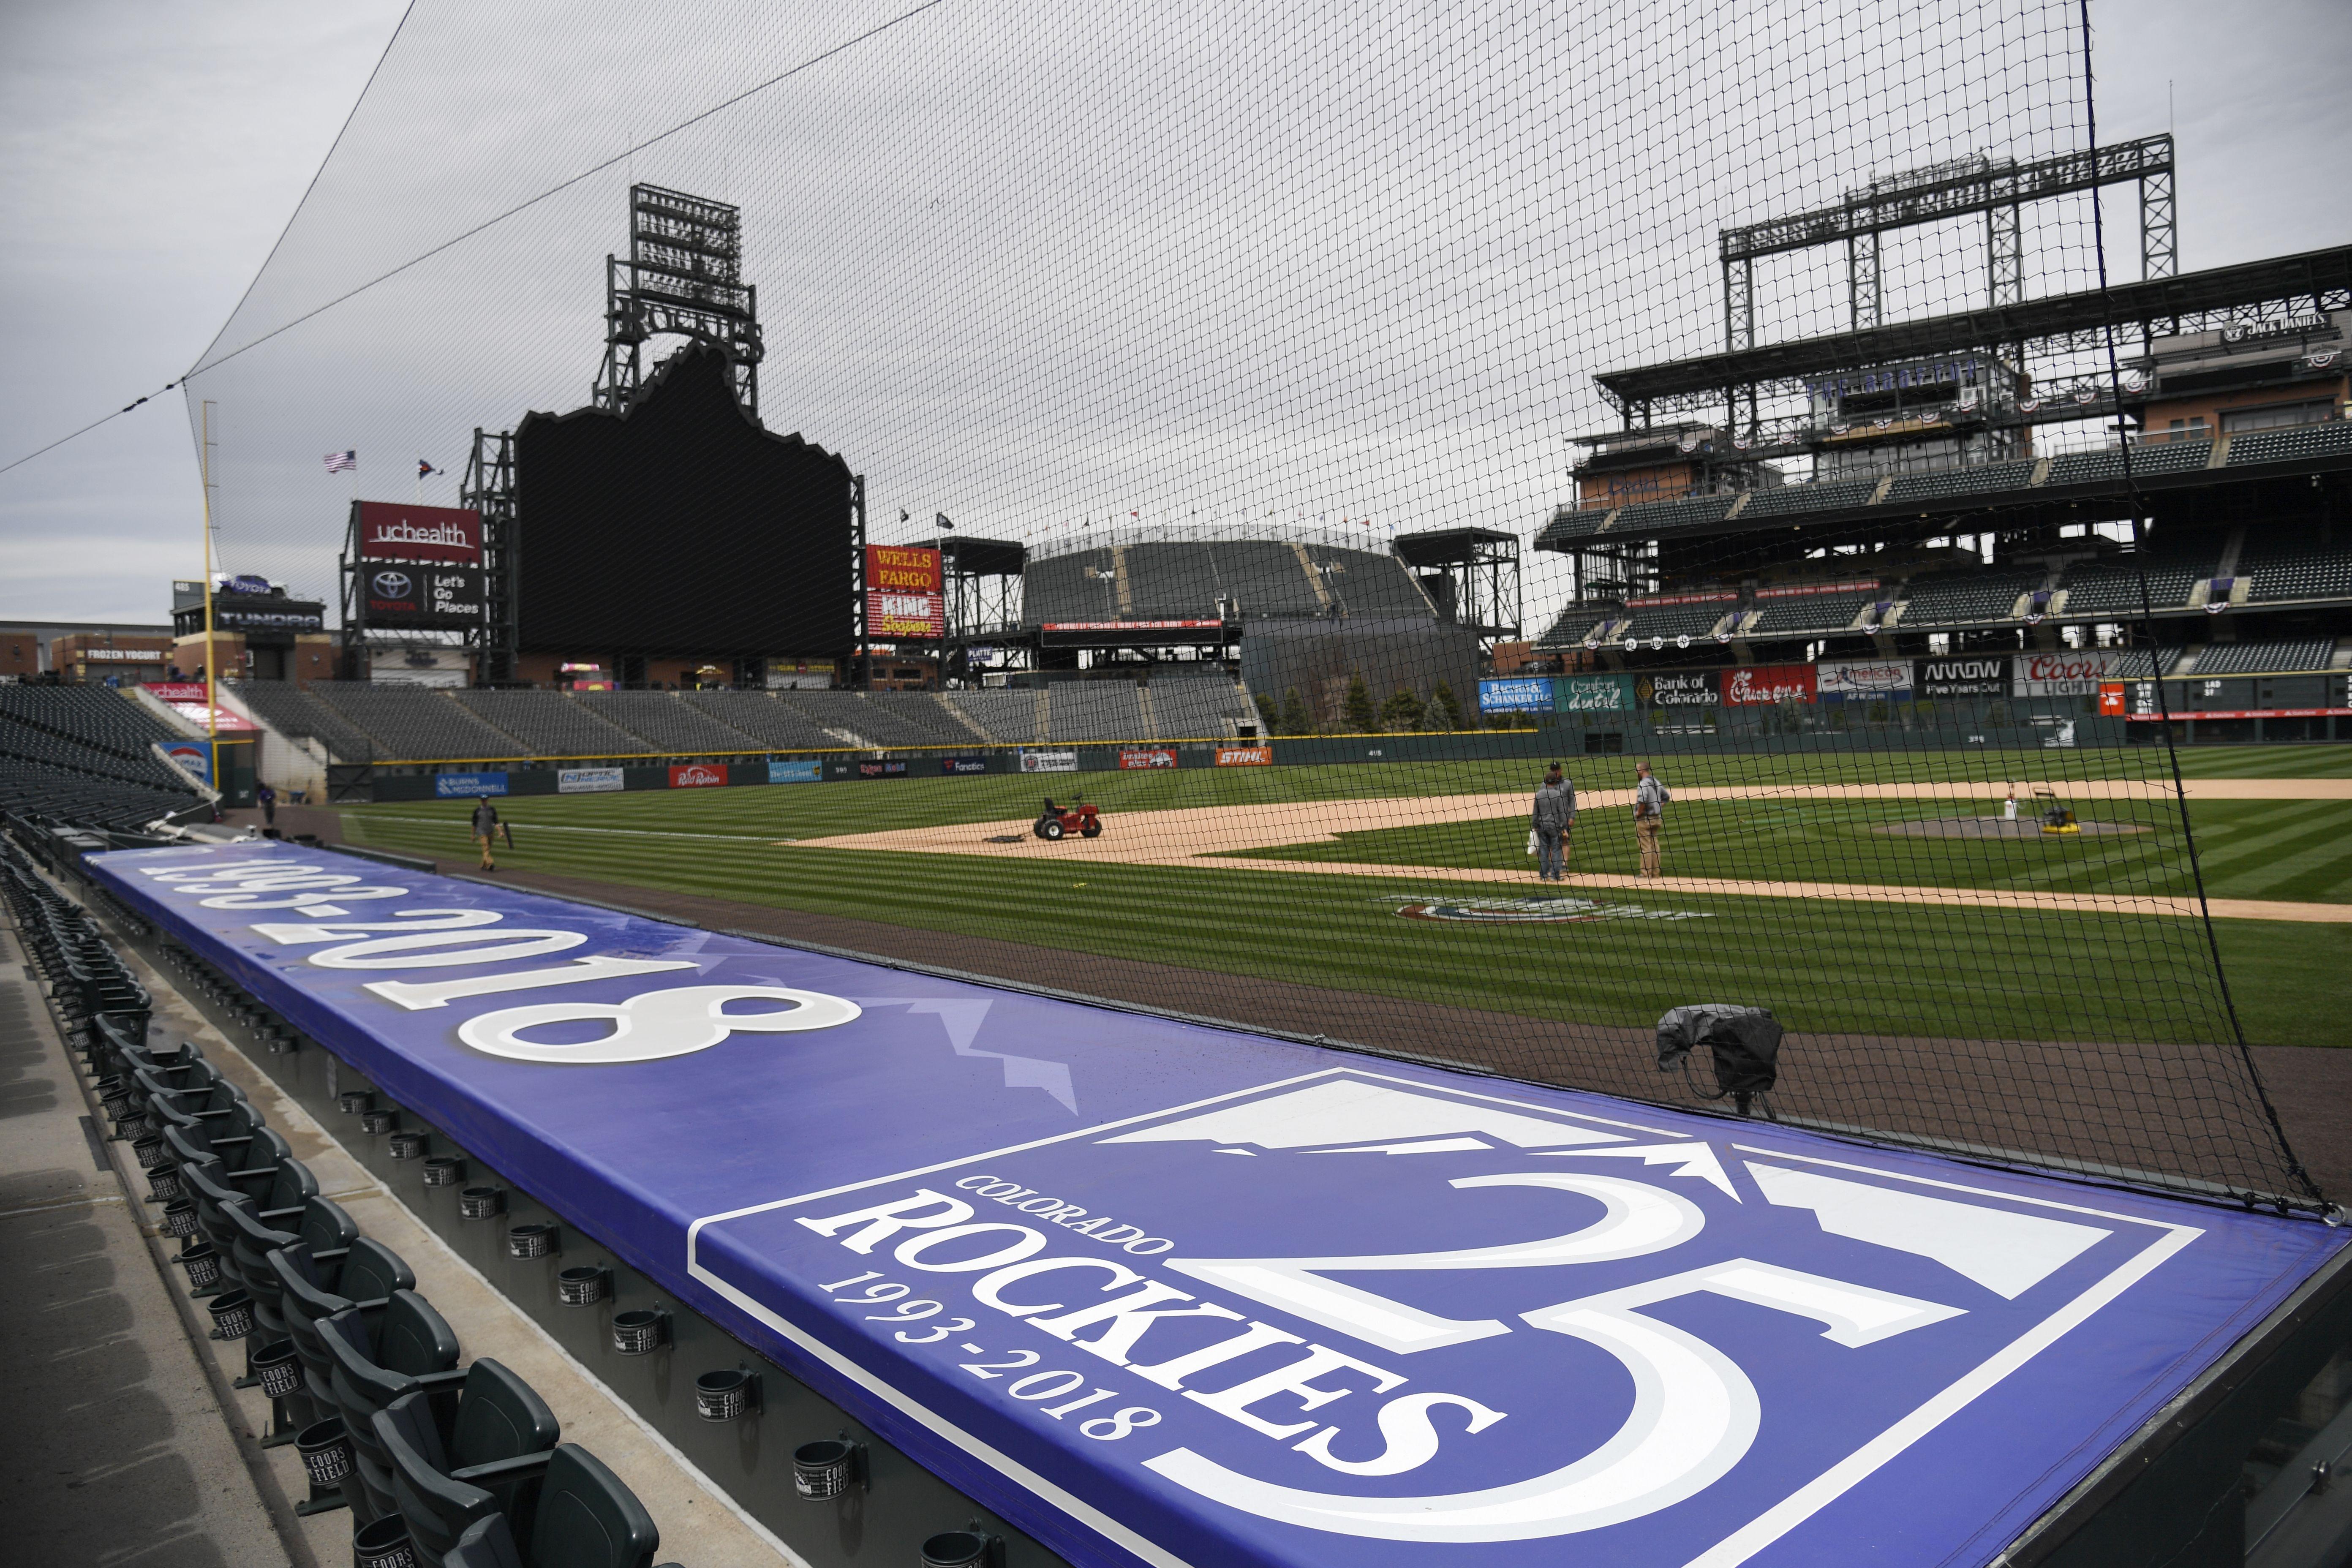 Coors Field Logo - Coors Field debuts new features for 2018 season, including massive